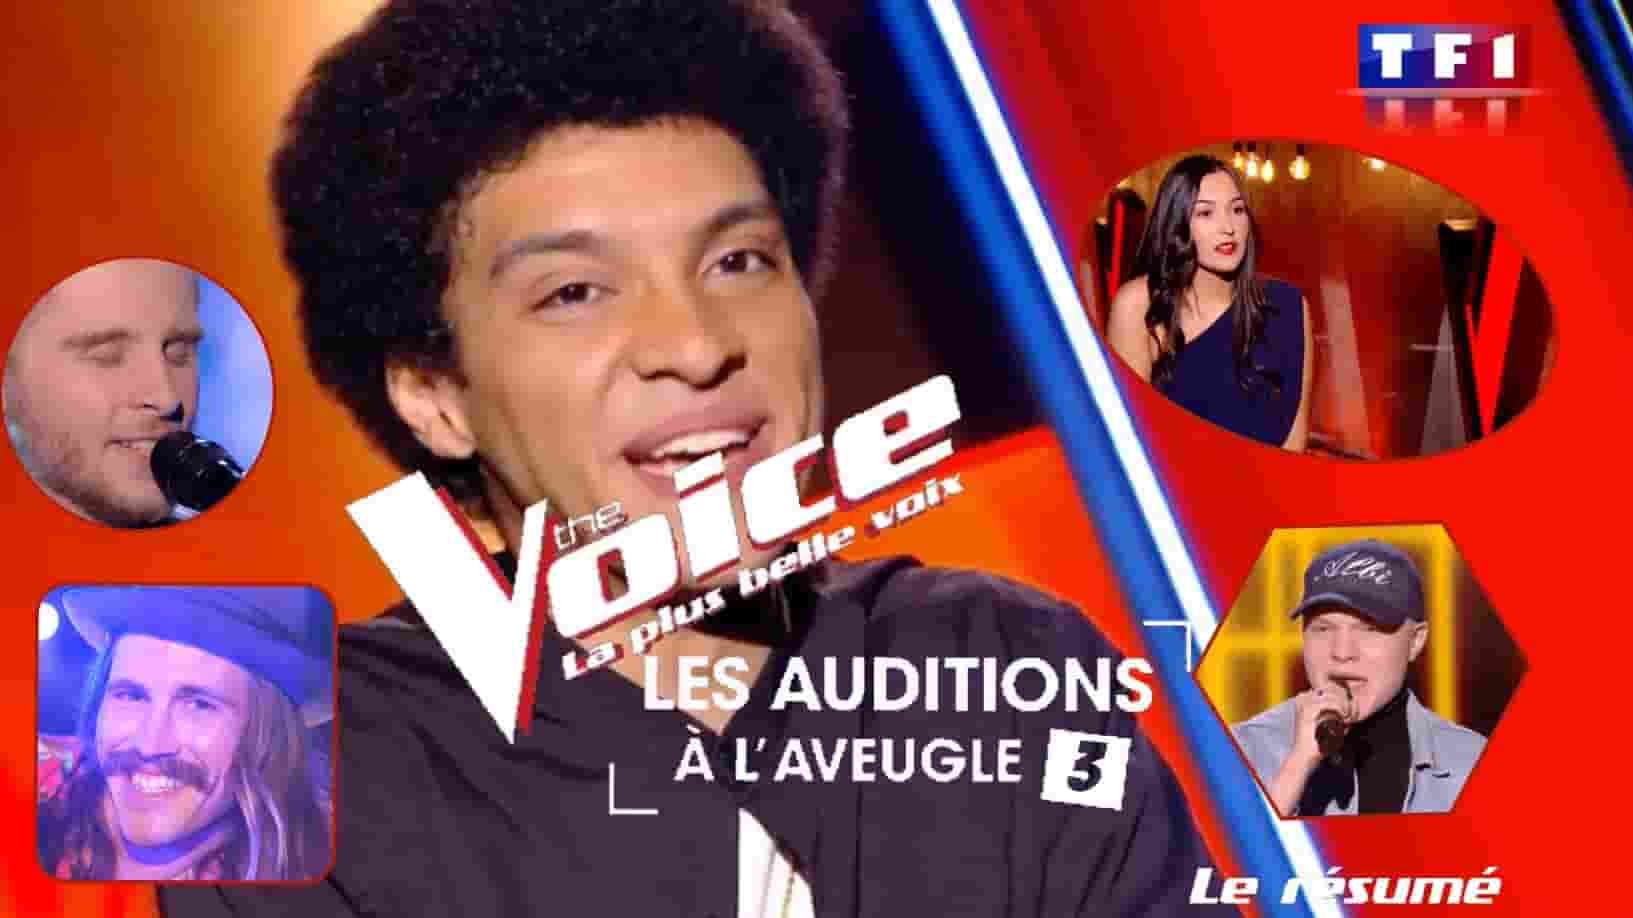 The Voice 8: prime n°3 des Auditions - ©/-\ll in One TV, All rights reserved. Do not copy. Reproduction Interdite